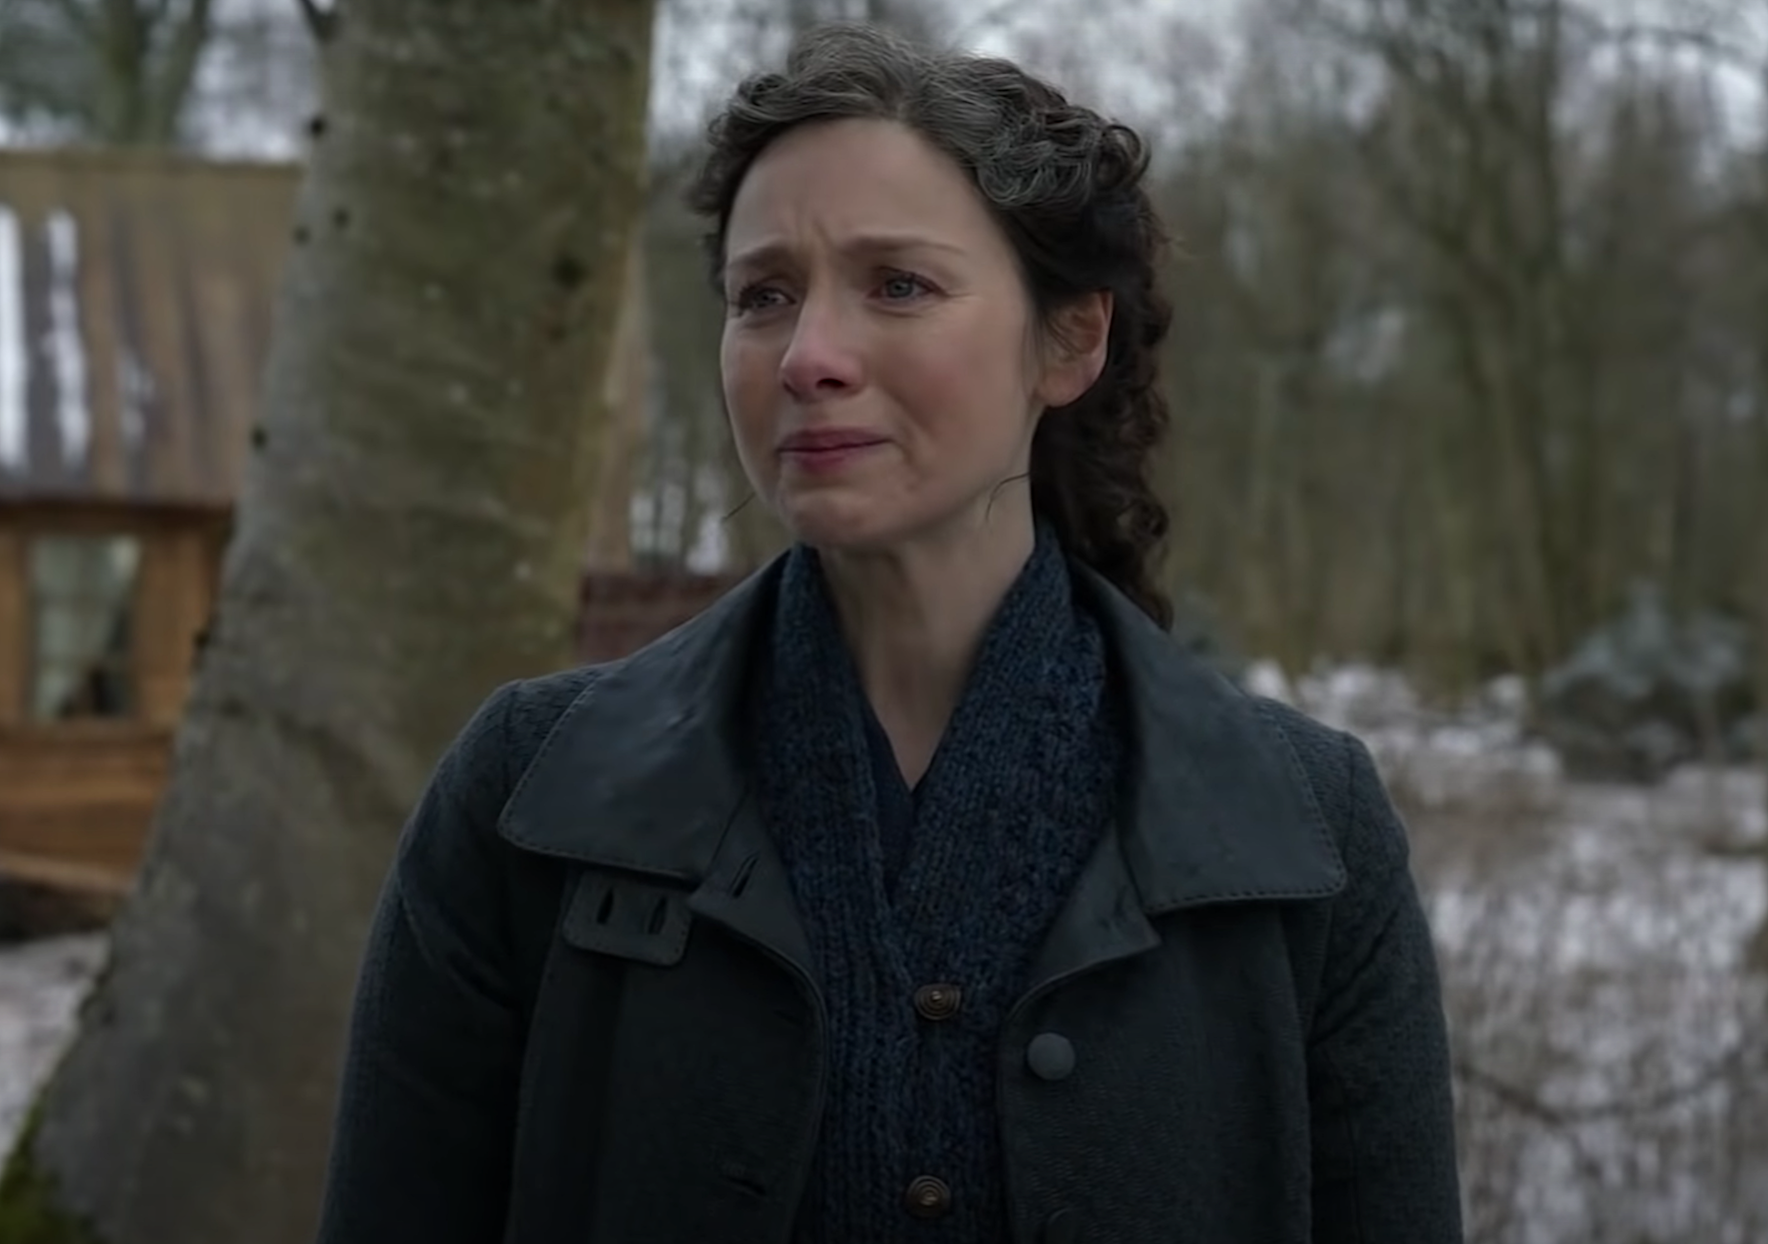 Caitriona Balfe in the 'Outlander' Season 6 trailer. She stands in a navy blue sweater and dark grey coat holding back tears. Surrounding her is a snowy forest and a cabin in the background.